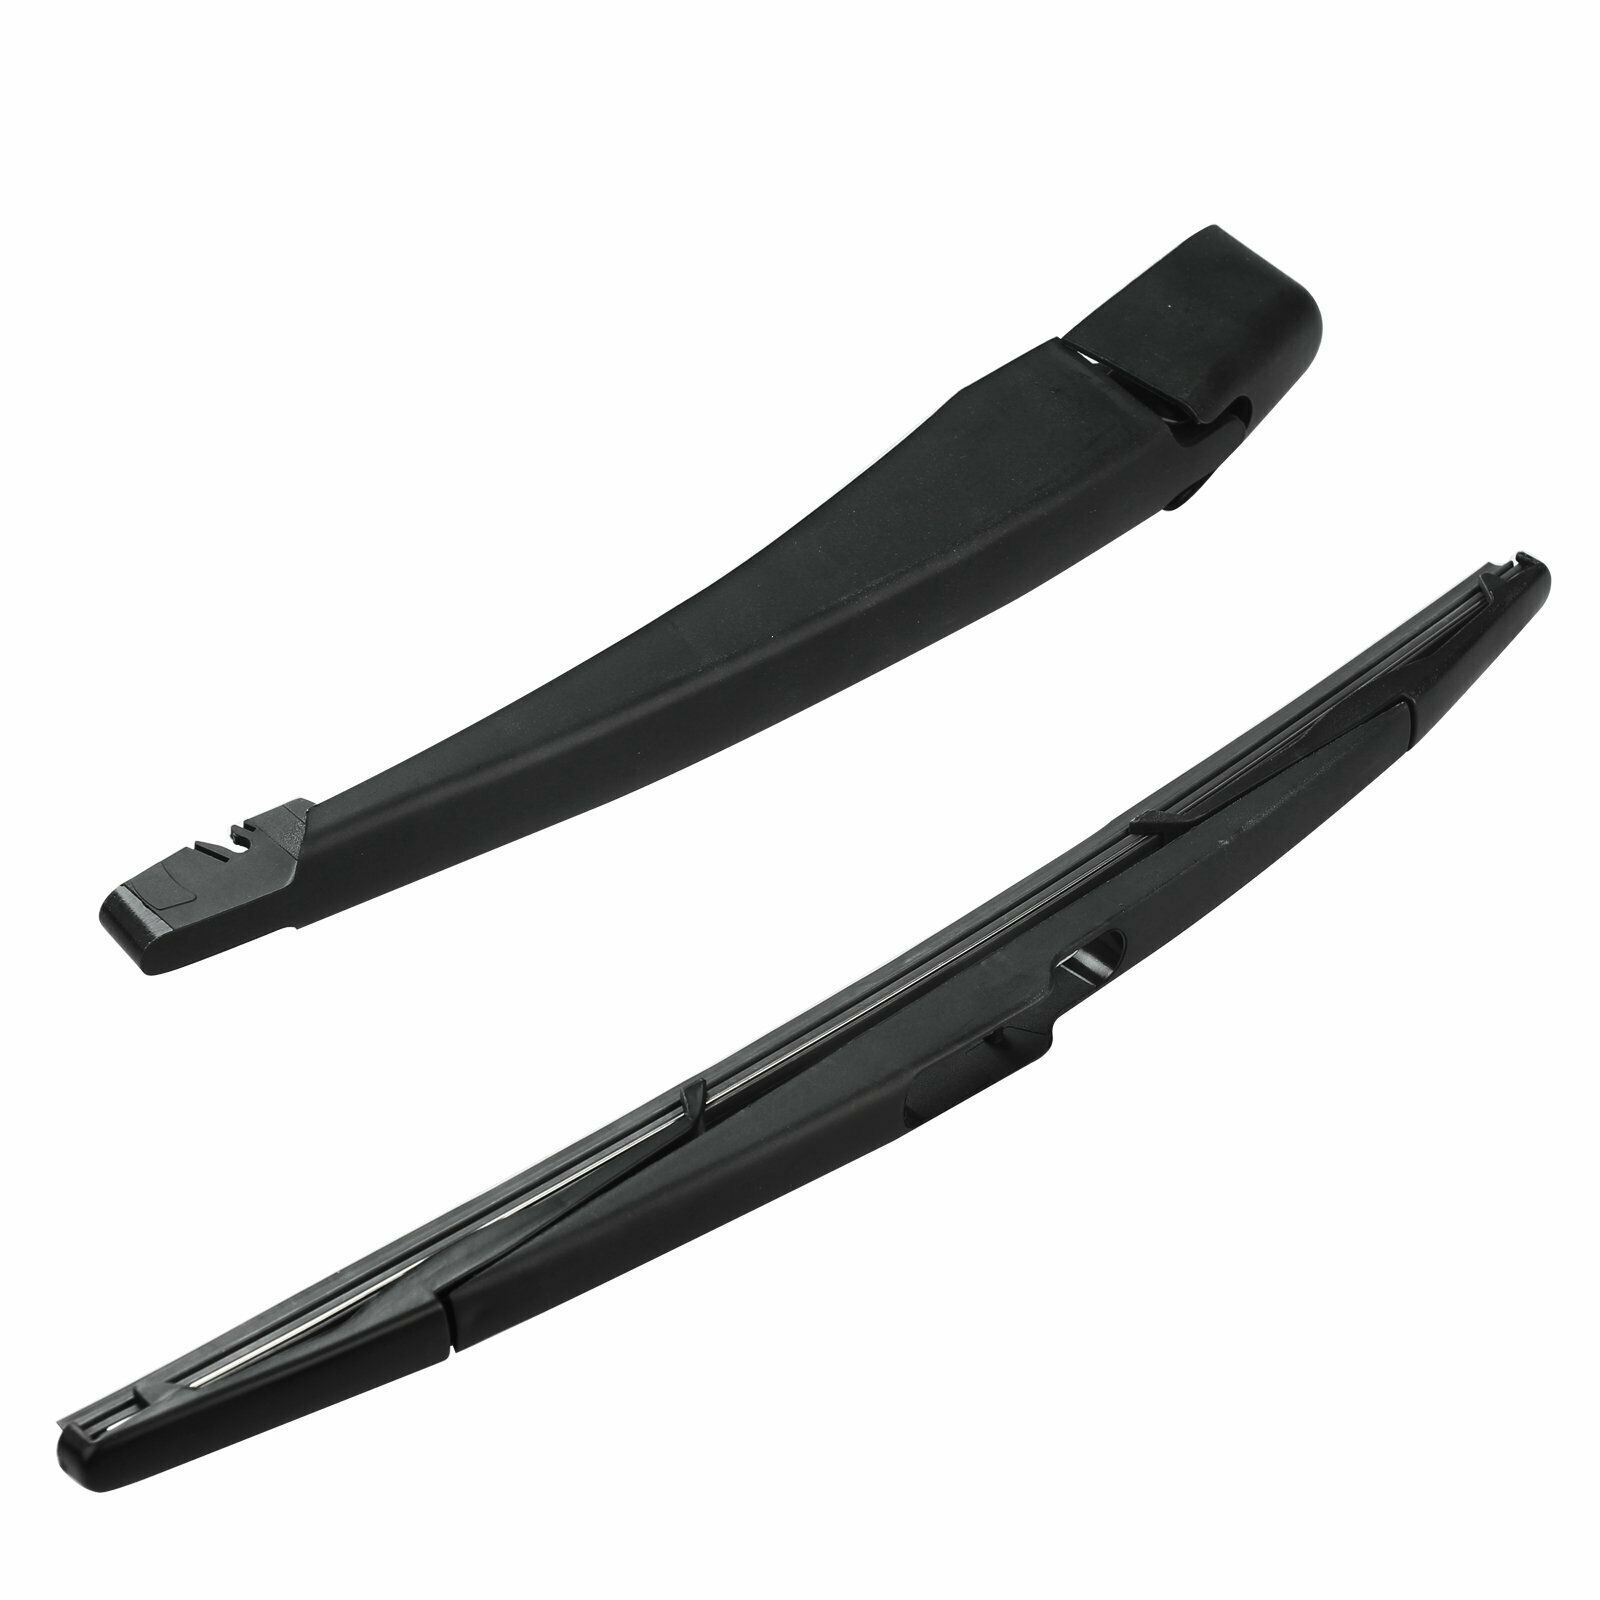 Rear Wiper Arm + Blade Set Fits Dodge Caravan Chrysler Town & Country 2008-2009 - Windshield 2007 Chrysler Town And Country Wiper Blade Size